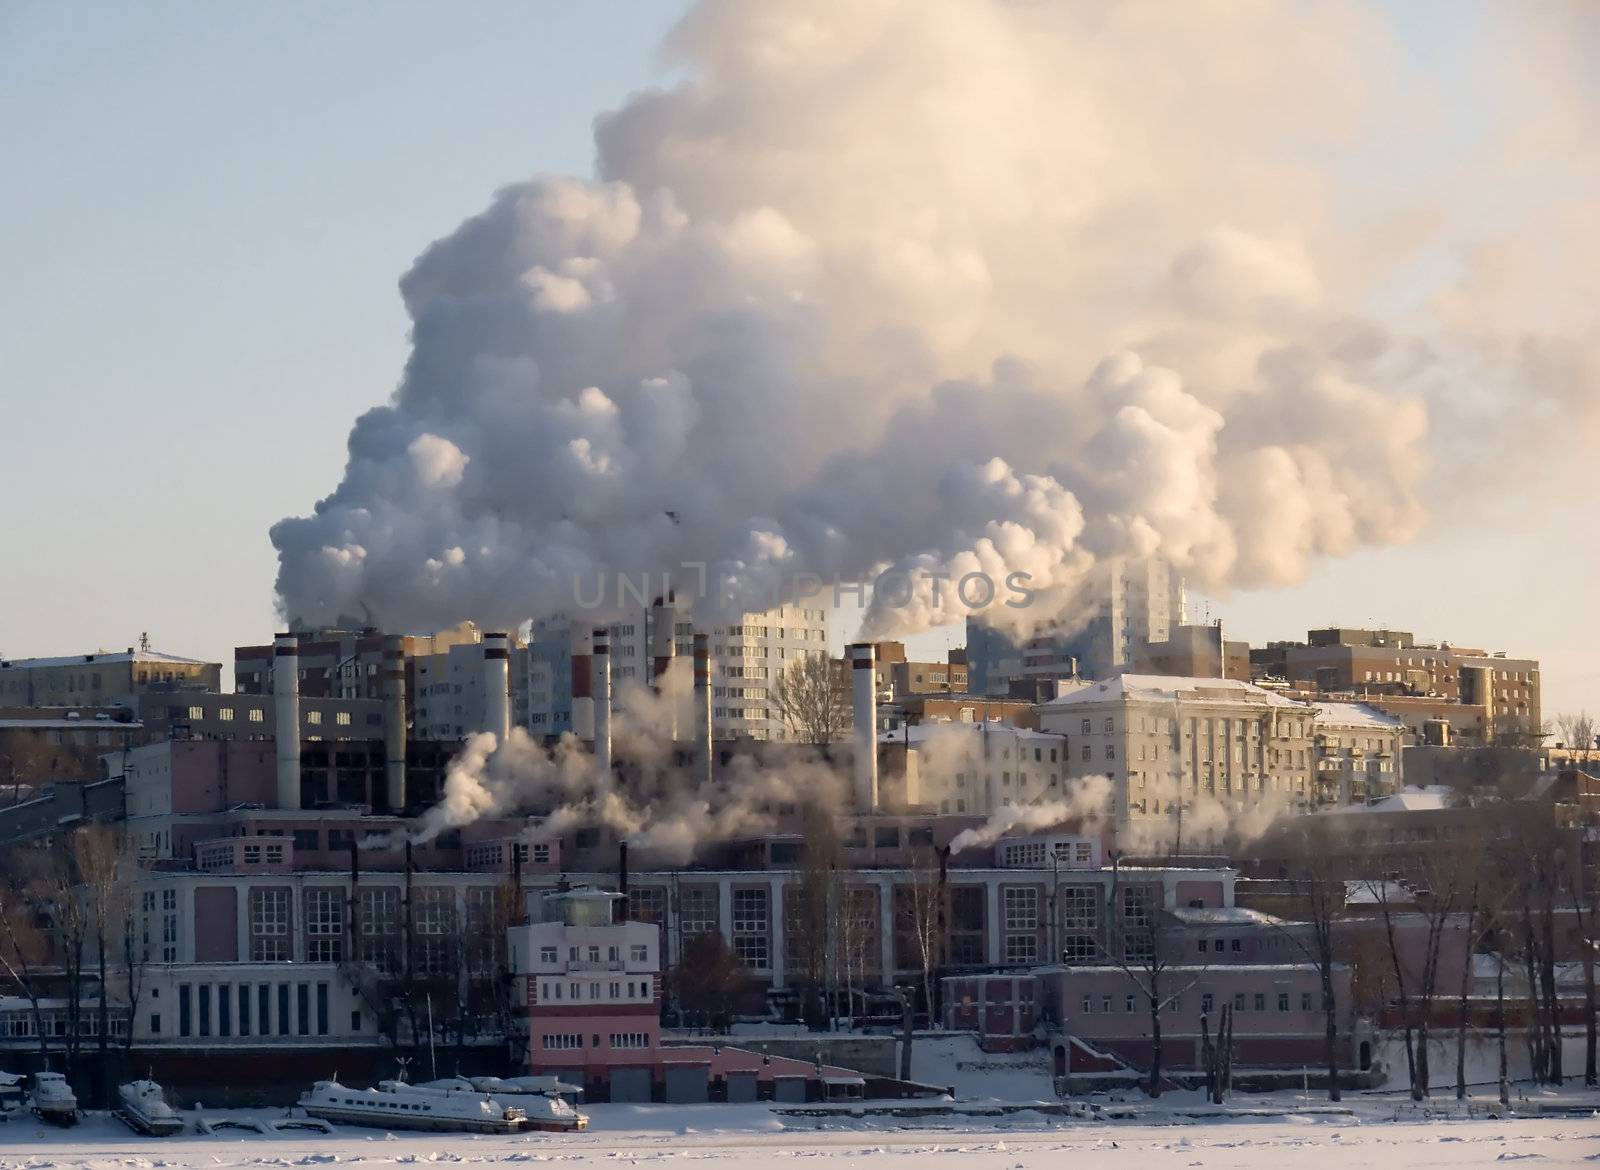 Winter urban landscape. From pipe factory fells smoke into the blue sky.